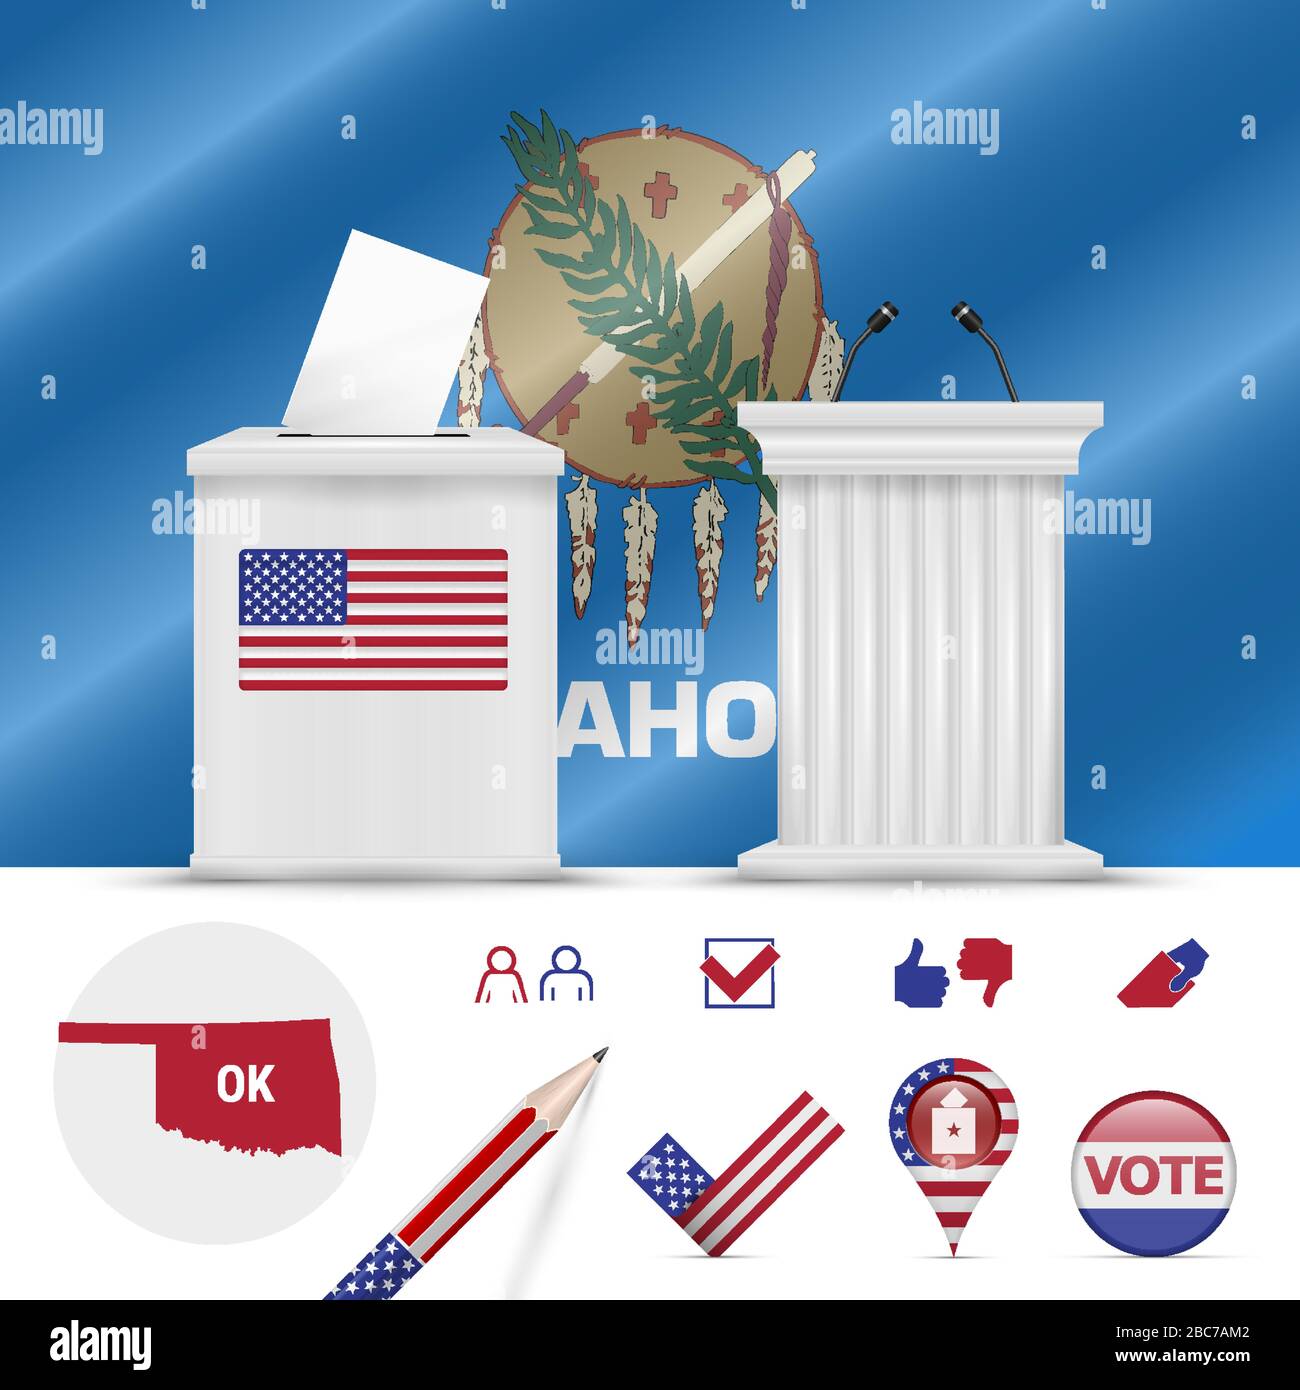 Presidential elections in Oklahoma. Vector waving flag, realistic ballot box, public speaker's podium, silhouette map and voting icon set. Stock Vector